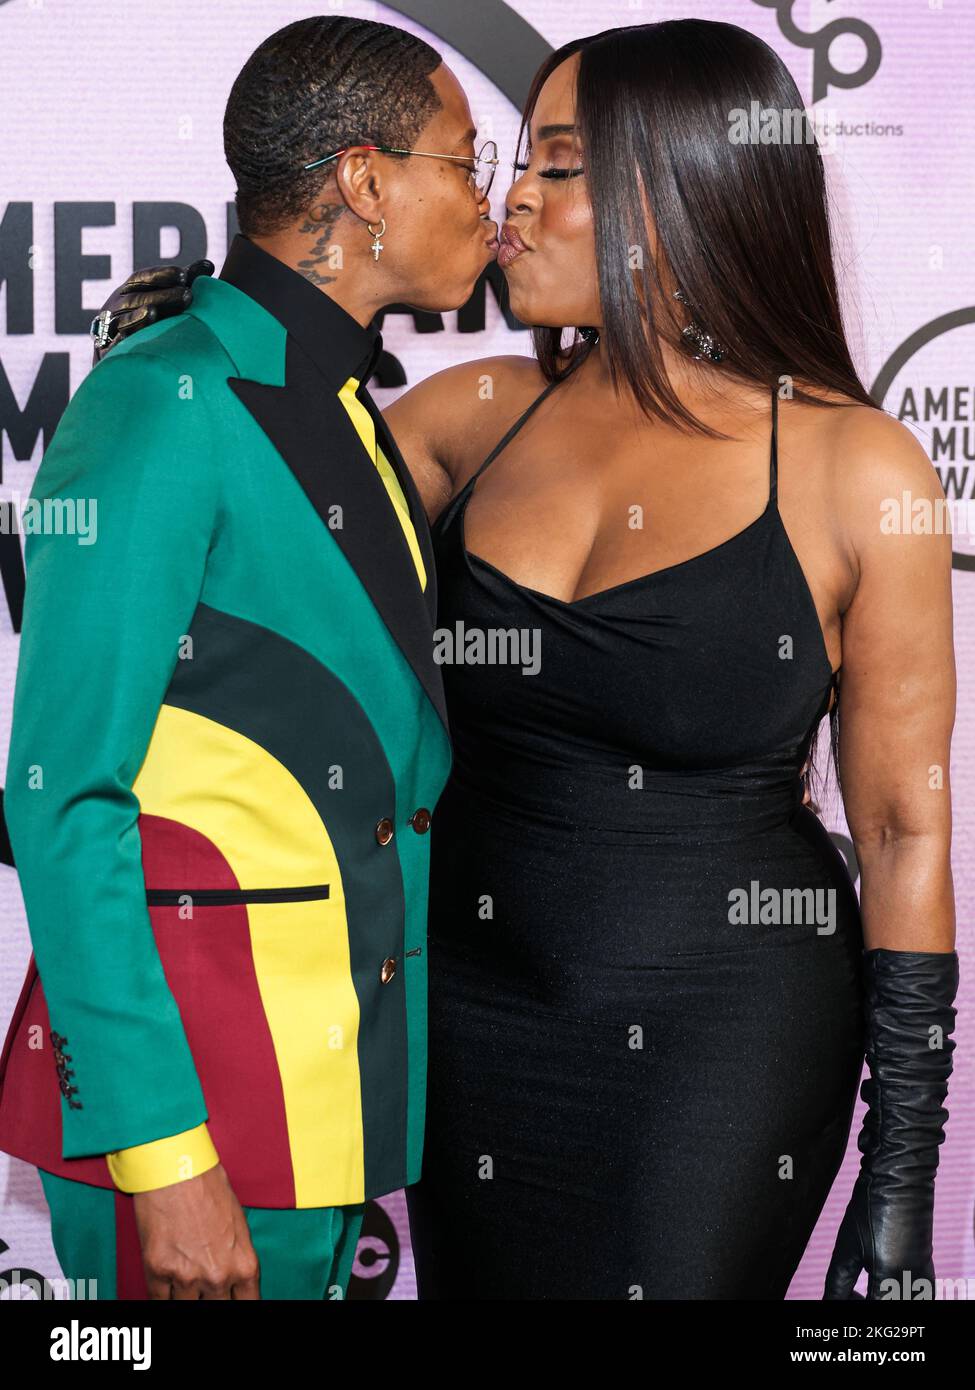 LOS ANGELES, CALIFORNIA, USA - NOVEMBER 20: Jessica Betts and wife Niecy Nash Betts arrive at the 2022 American Music Awards (50th Annual American Music Awards) held at Microsoft Theater at L.A. Live on November 20, 2022 in Los Angeles, California, United States. (Photo by Xavier Collin/Image Press Agency) Stock Photo